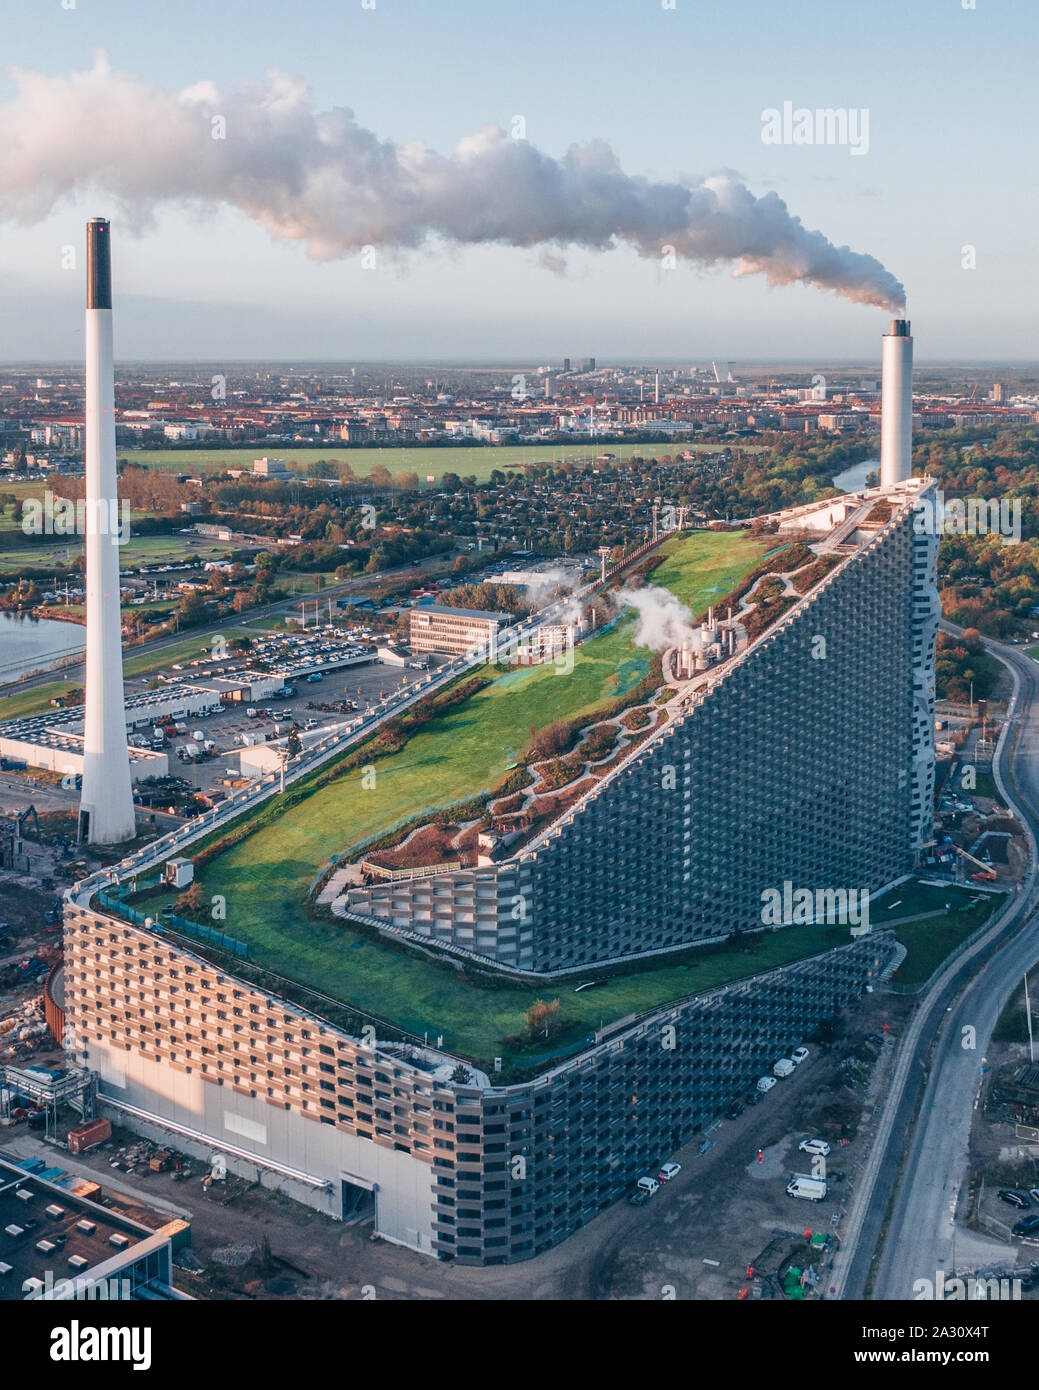 Amager Bakke also known as Amager Slope or CopenHill, is a combined heat  and power waste-to-energy plant in Copenhagen, Denmark. The plant is  designed by Bjarke Ingels Group with a 85 m